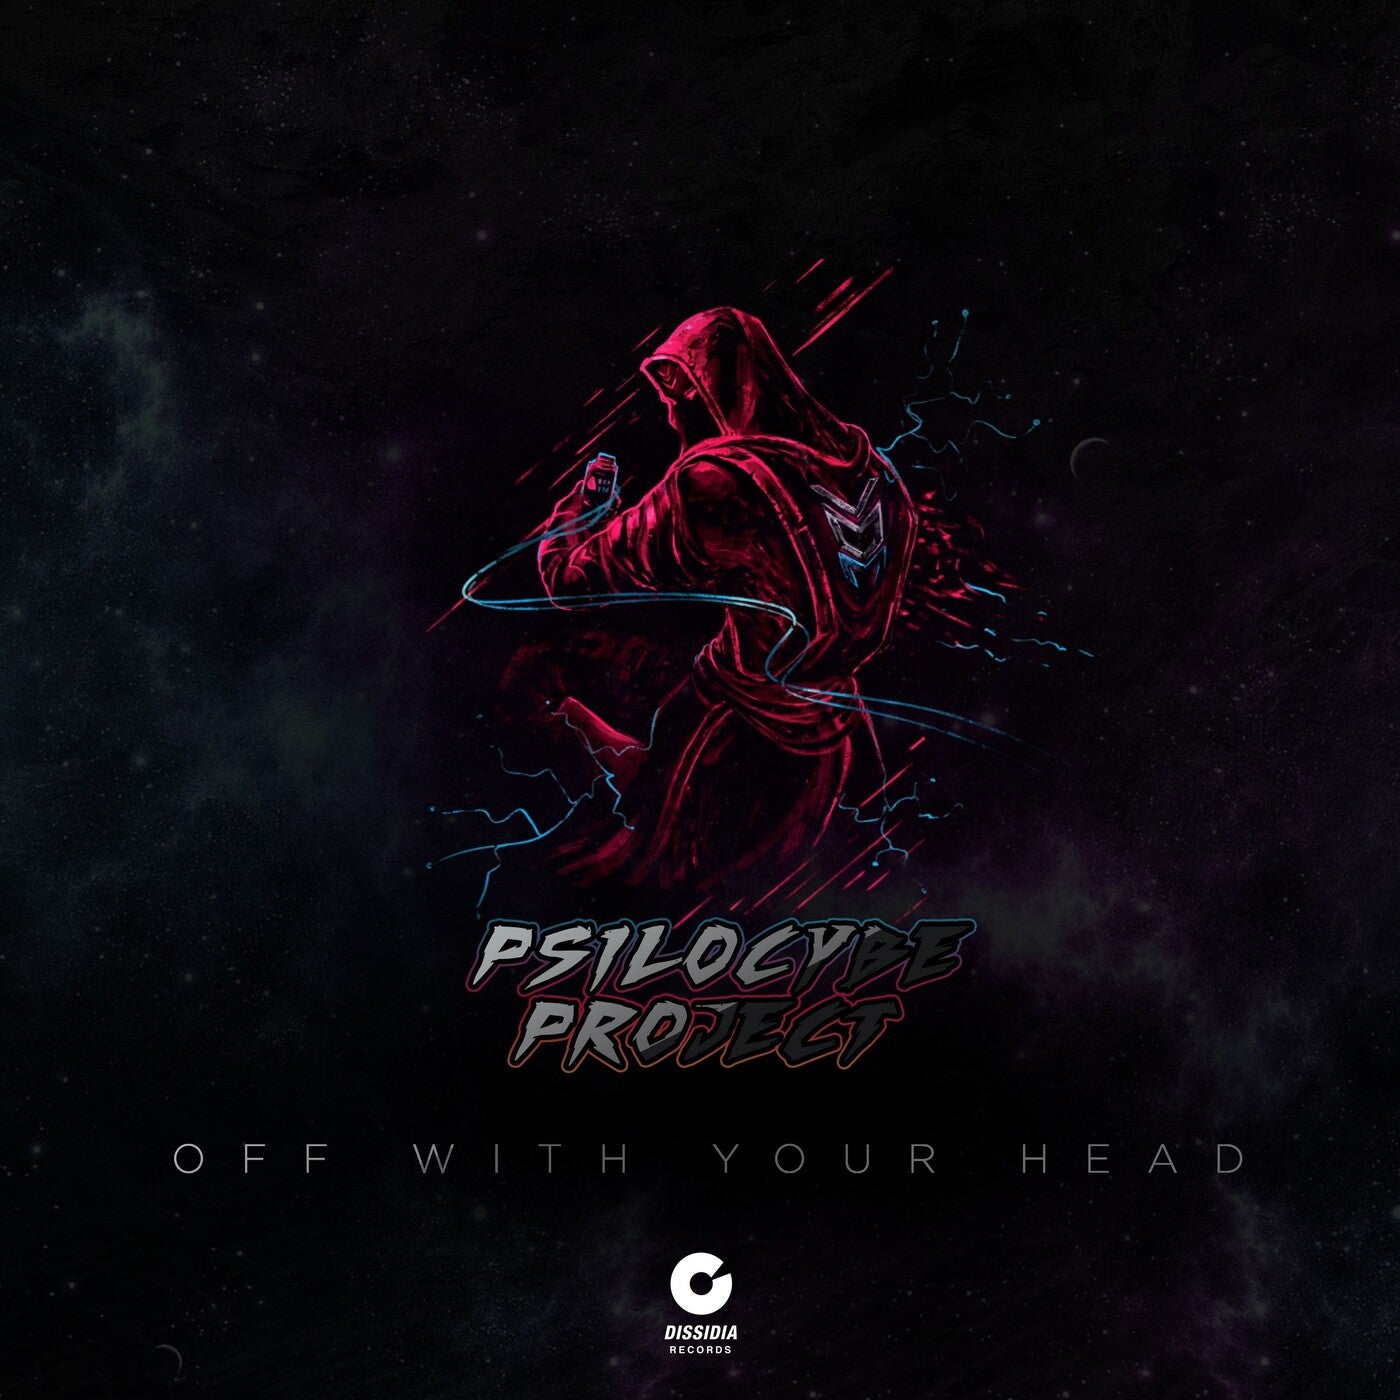 Off with Your Head